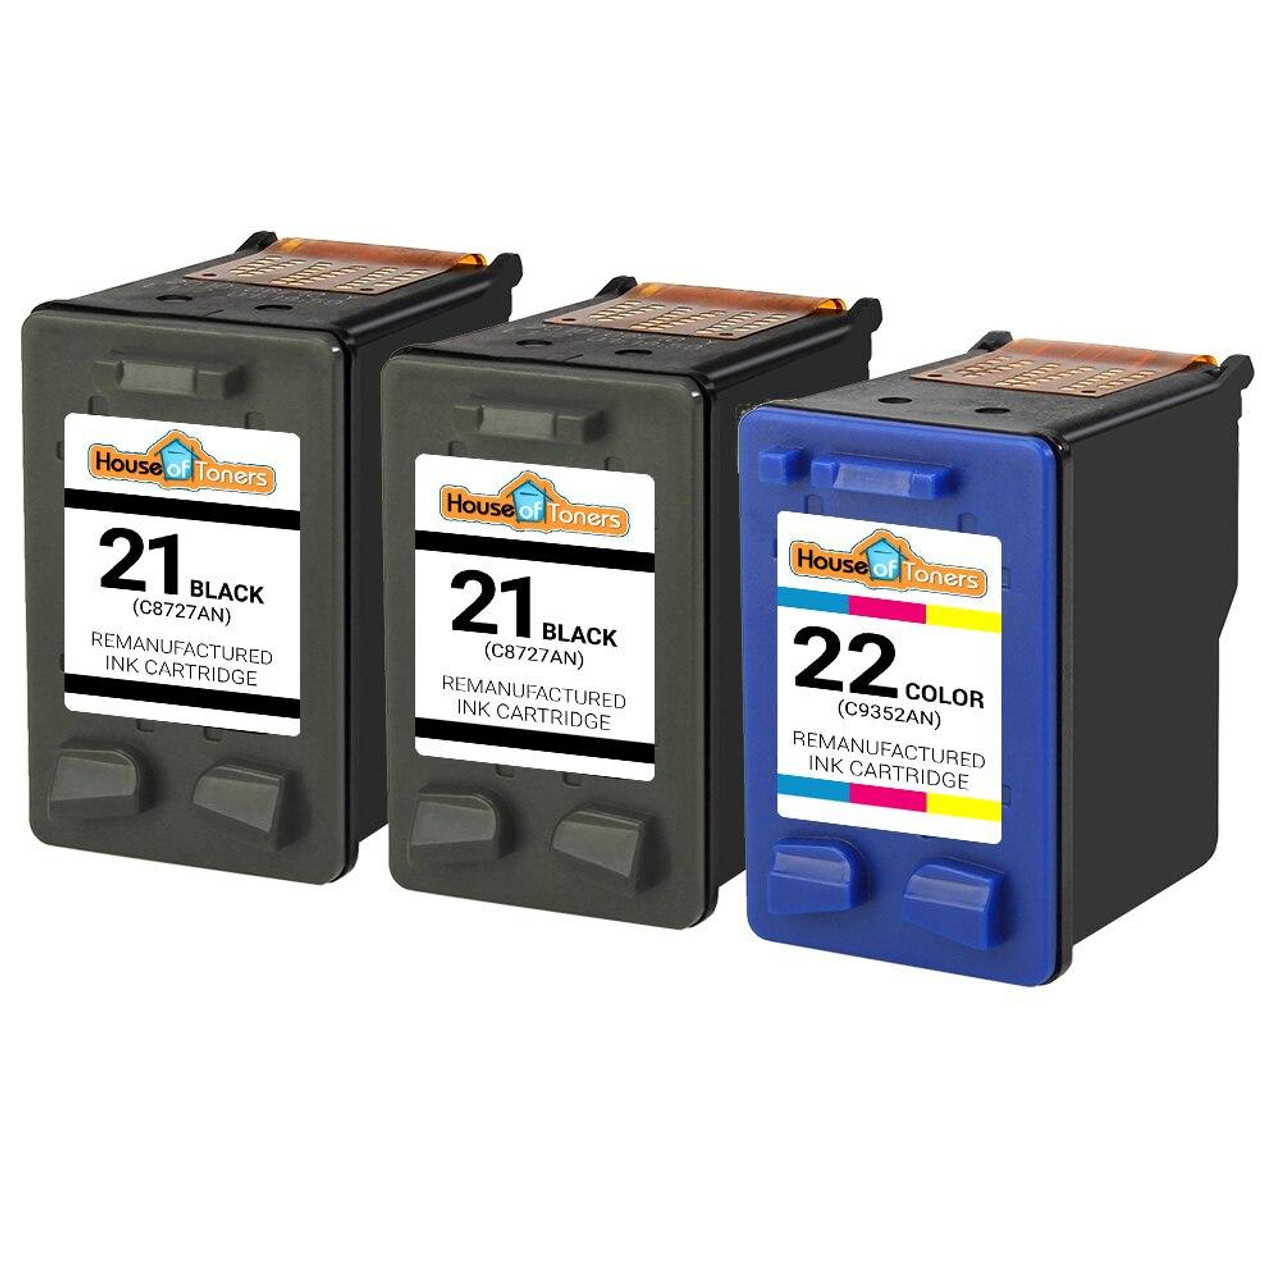 Remanufactured Ink Cartridge for HP & 22 3PK - 2B/1C